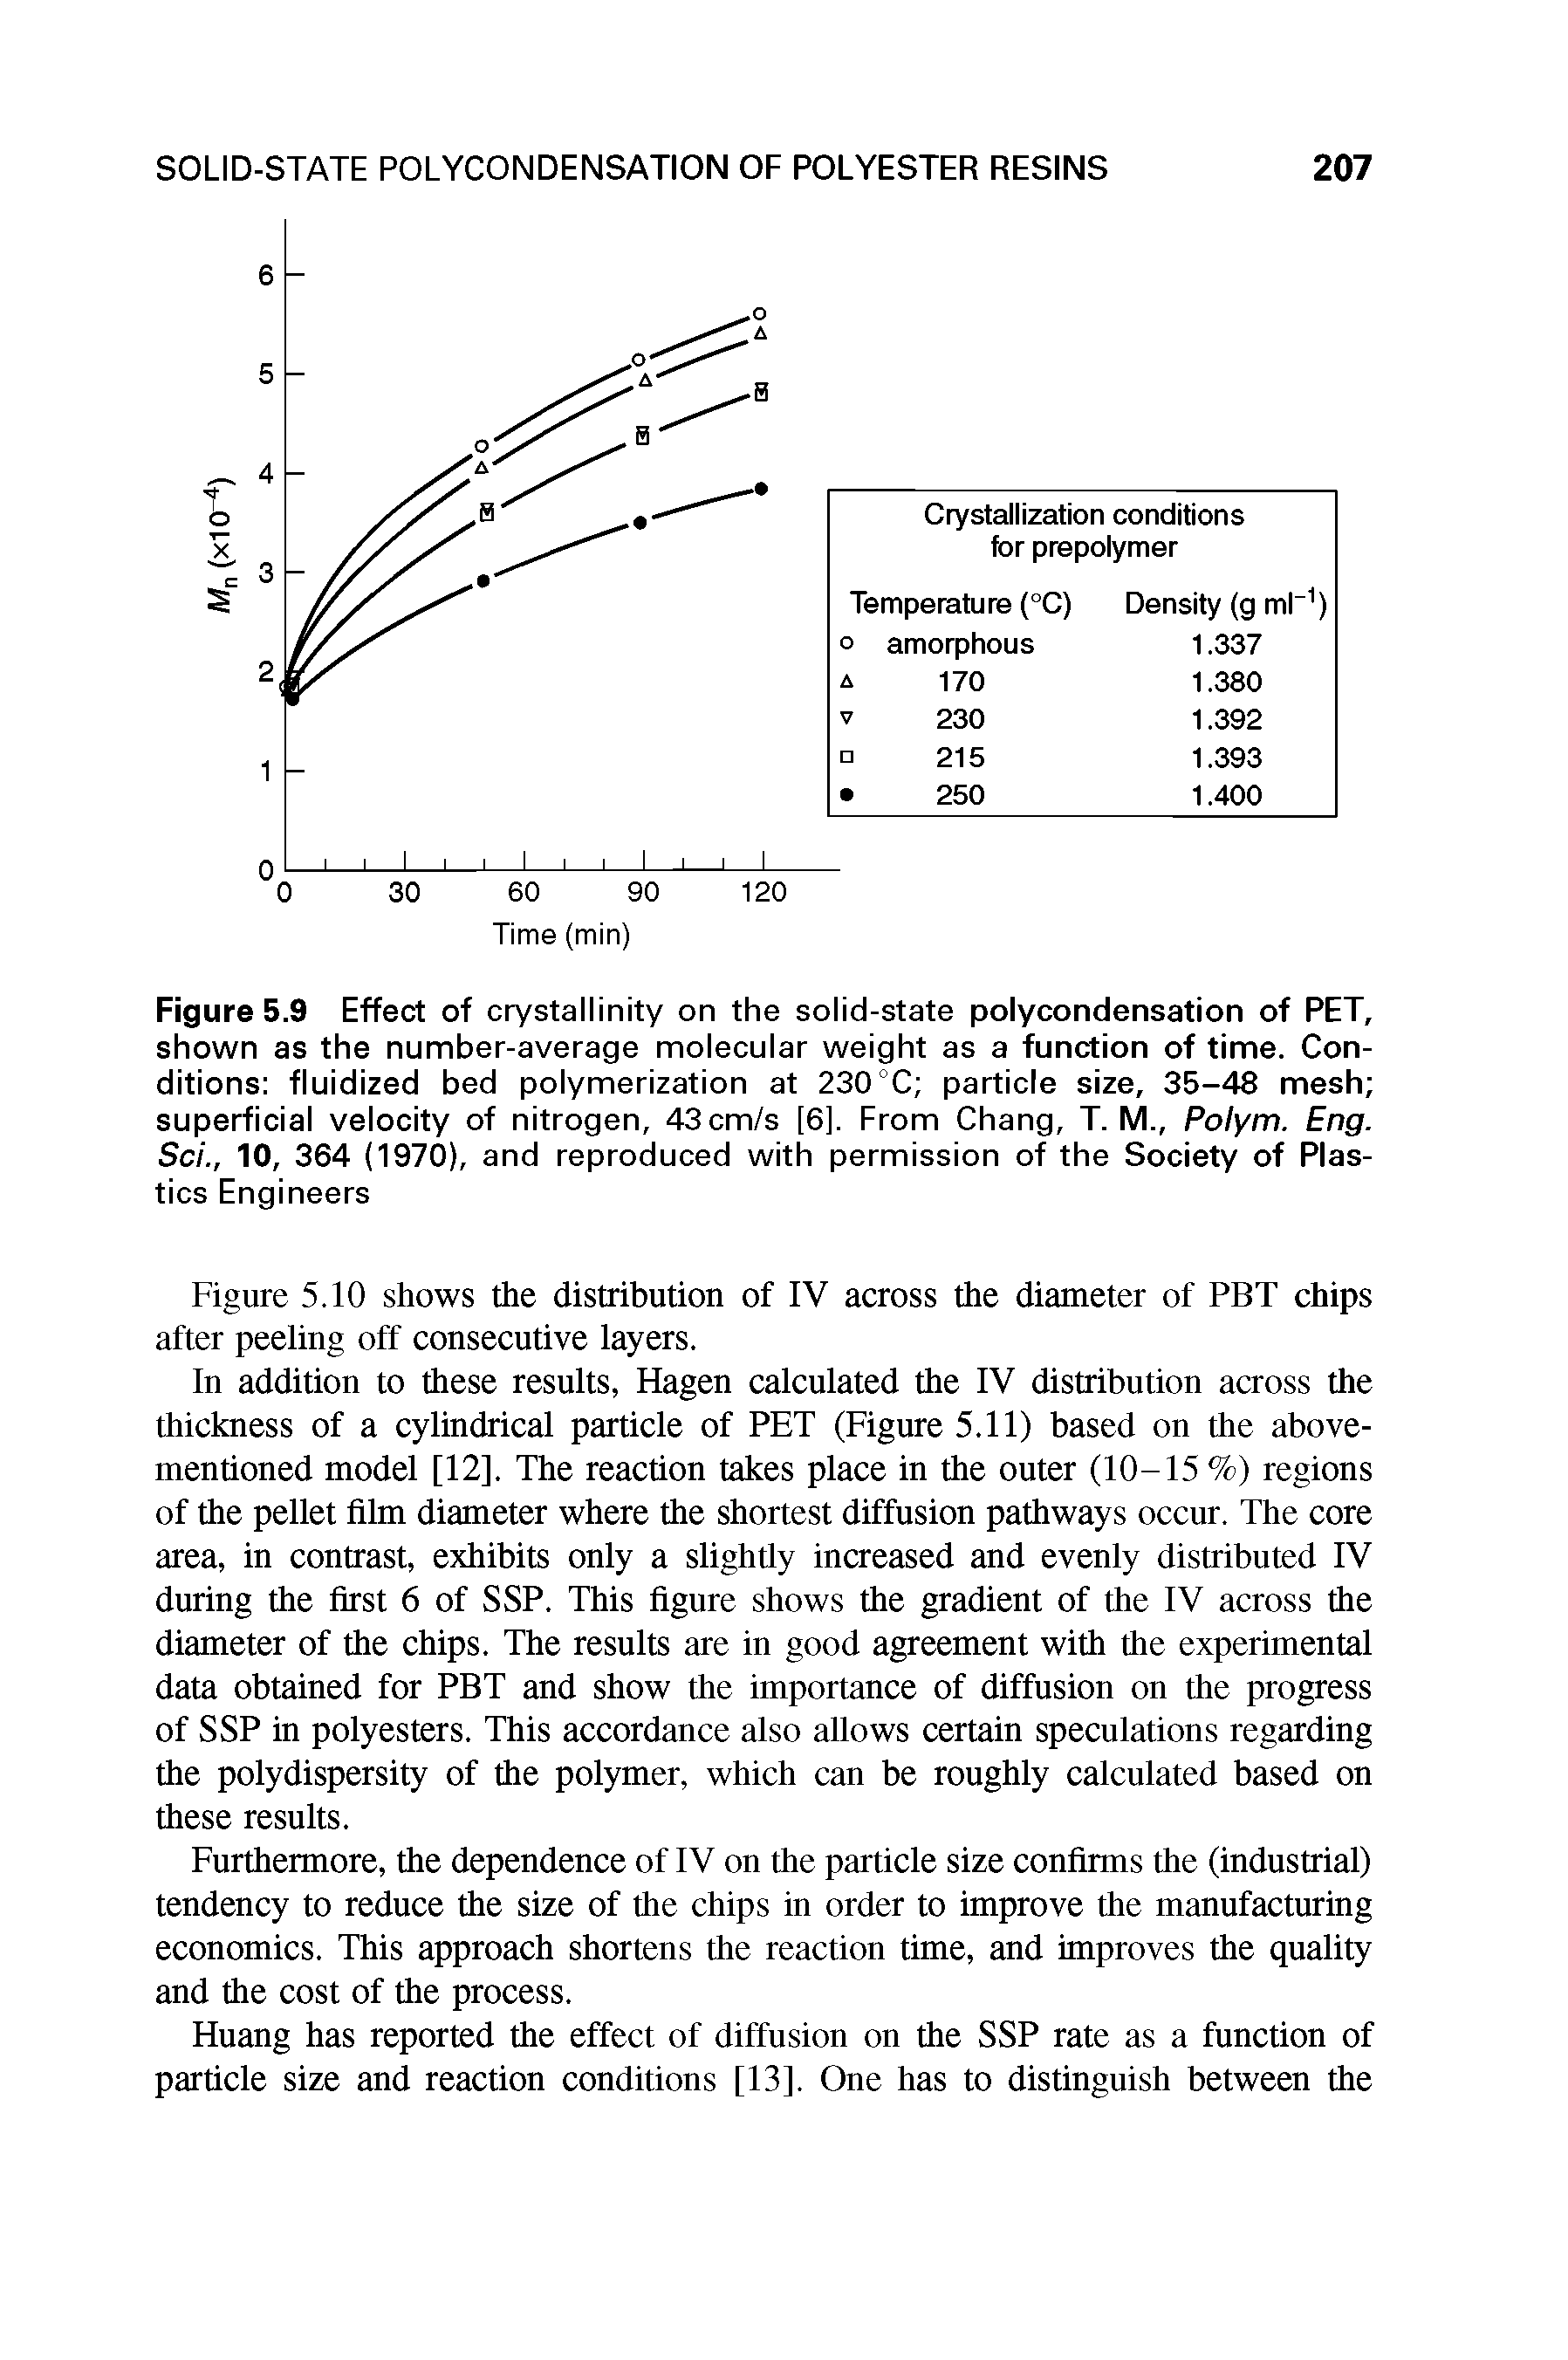 Figure 5.9 Effect of crystallinity on the solid-state polycondensation of PET, shown as the number-average molecular weight as a function of time. Conditions fluidized bed polymerization at 230°C particle size, 35-48 mesh superficial velocity of nitrogen, 43cm/s [6]. From Chang, T. M., Polym. Eng. Sci., 10, 364 (1970), and reproduced with permission of the Society of Plastics Engineers...